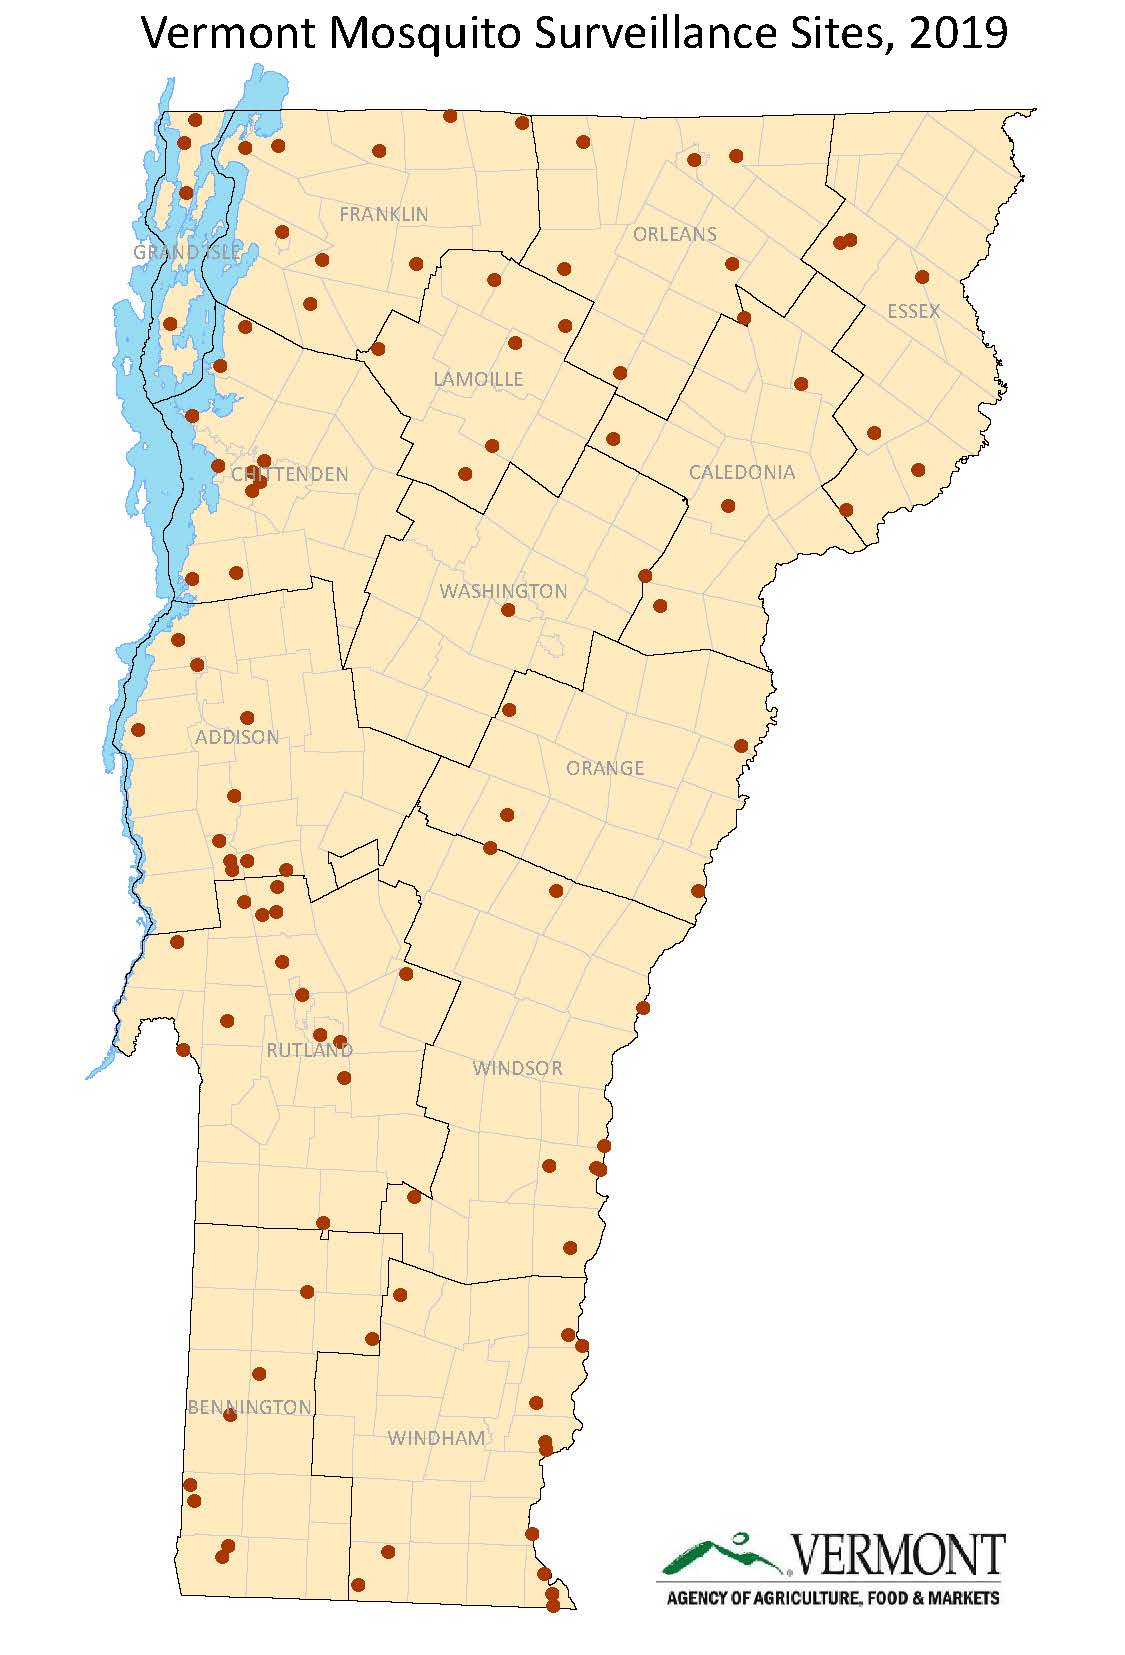 A map of Vermont with red dots showing locations of mosquito traps in 2019 in the state.